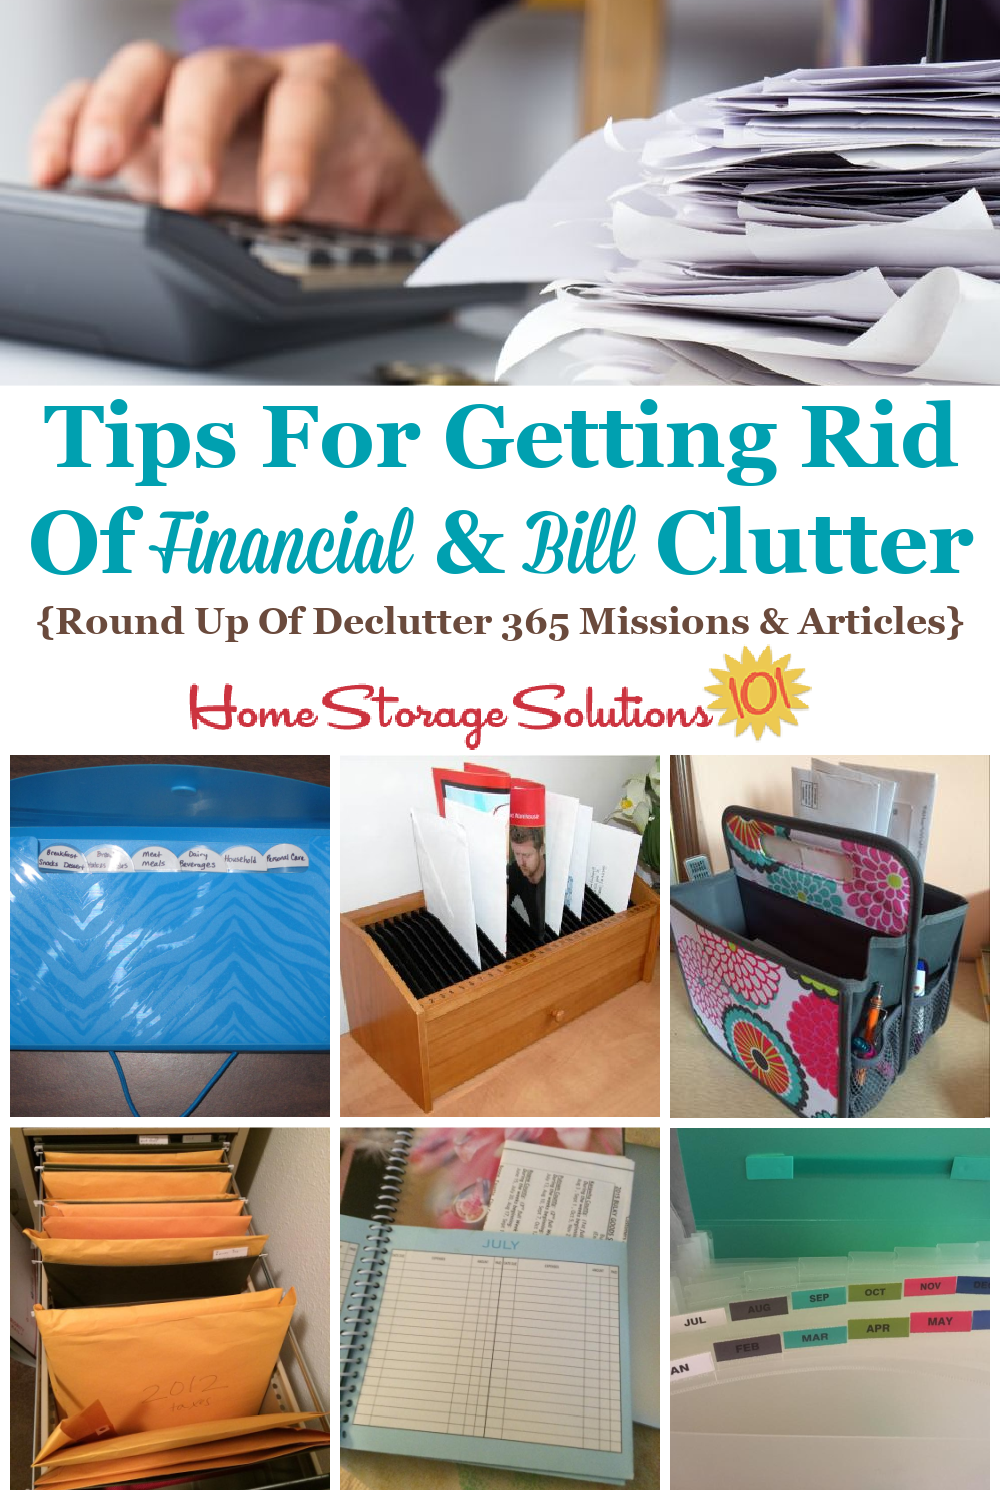 A round up of tips for getting rid of financial and bill clutter all around your home {on Home Storage Solutions 101}